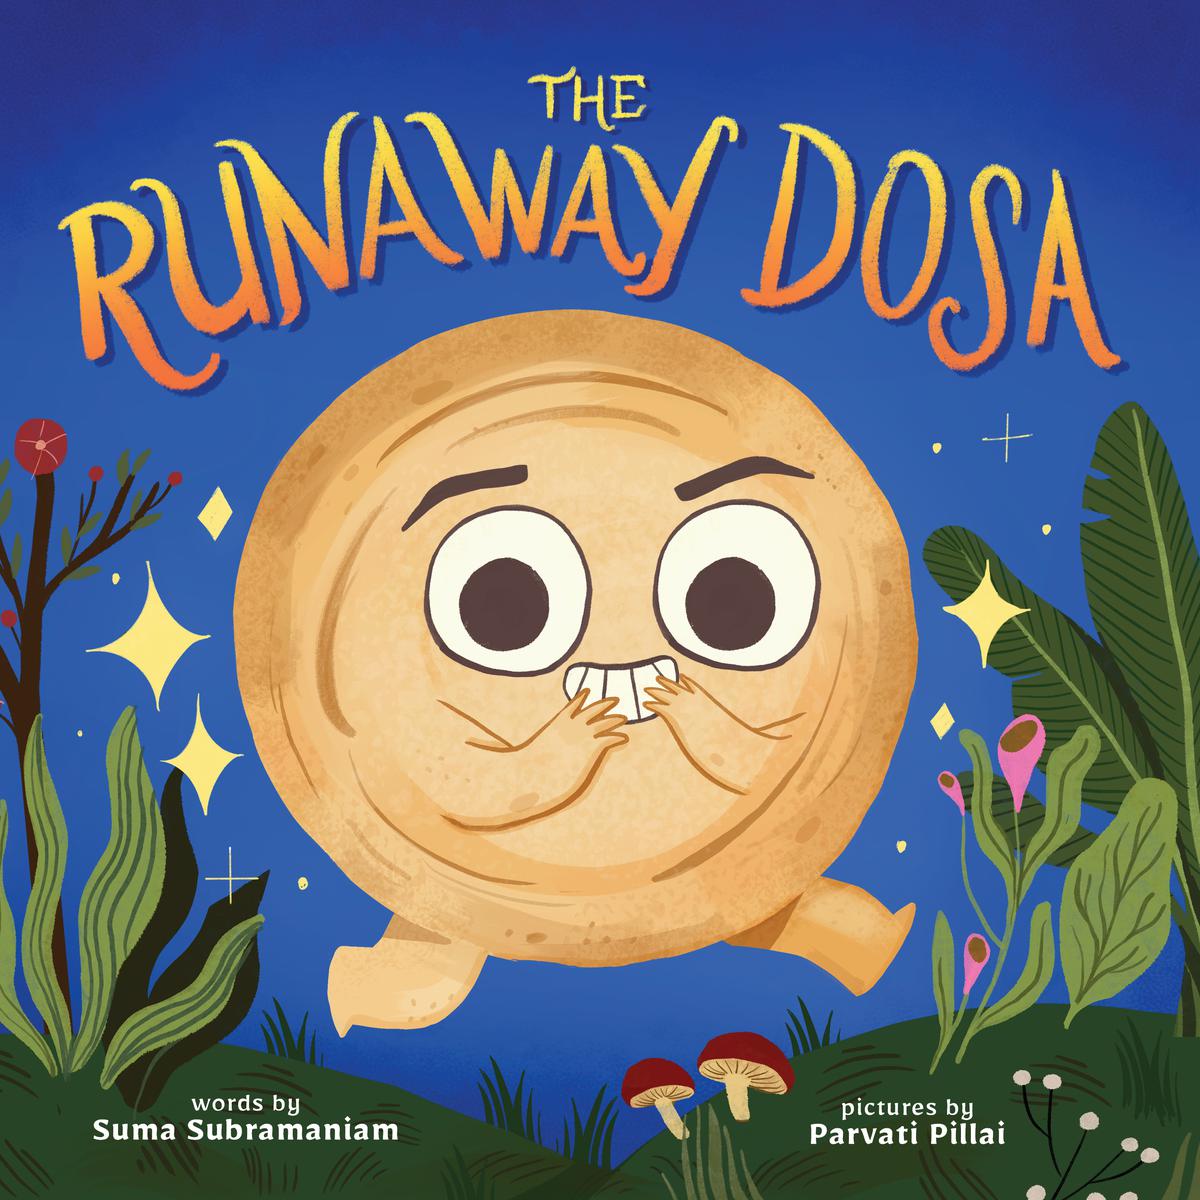 The book drew inspiration from The Gingerbread Man and the all-time favorite Tamil rhyme, ‘Dosai! Amma, Dosai’.